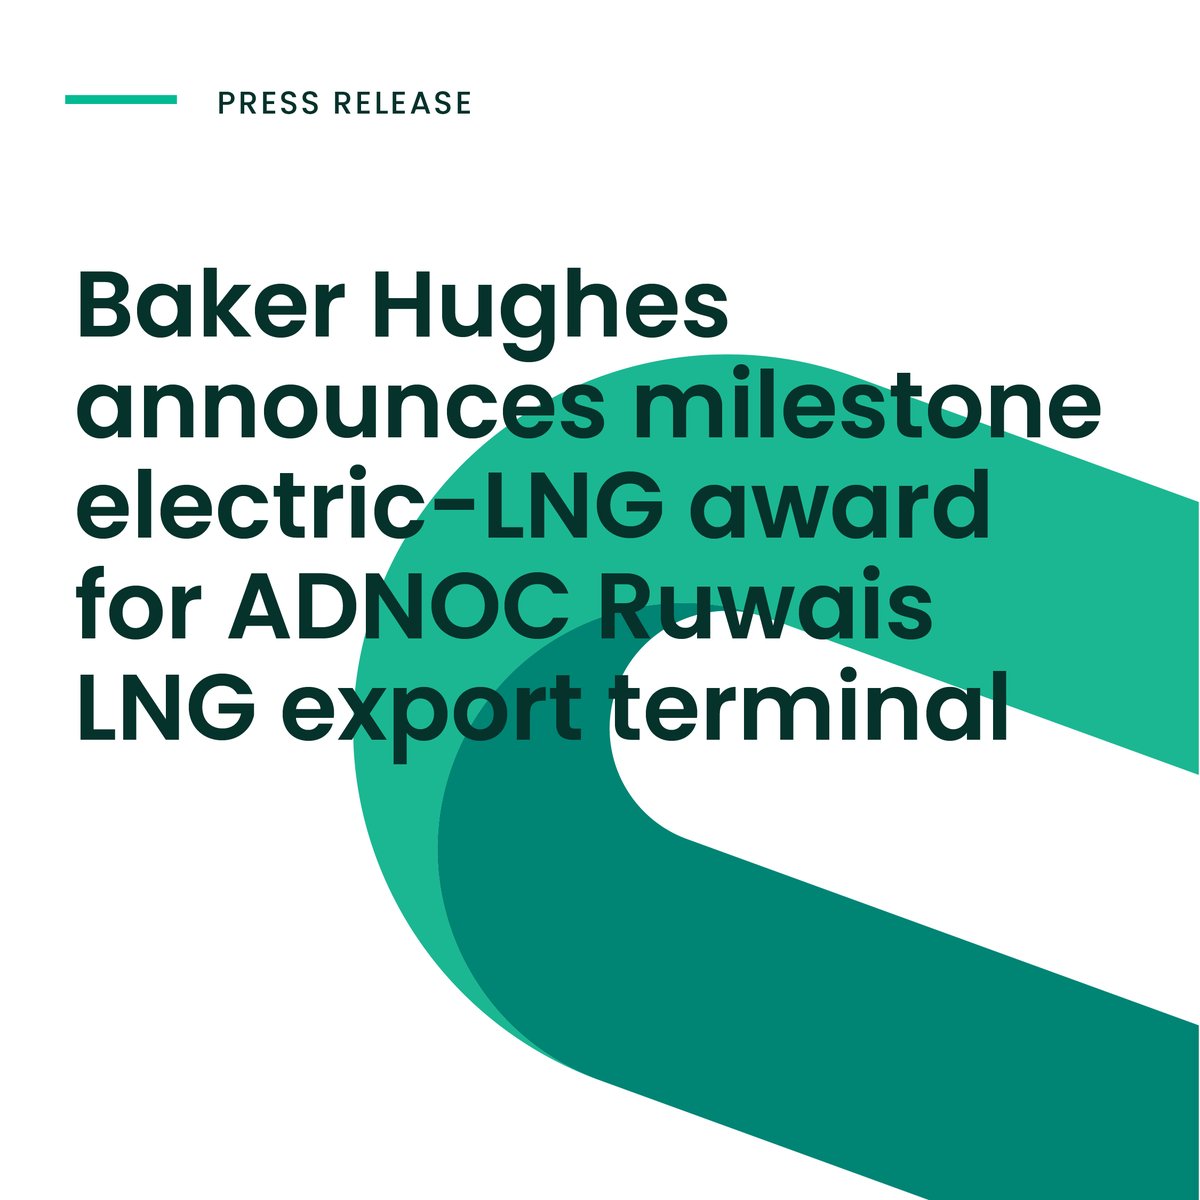 Today, at ADIPEC, we announced an agreement to provide two electric liquefaction systems (e-LNG) for @ADNOCGroup's Ruwais LNG project in the United Arab Emirates. Find out more in the press release here: investors.bakerhughes.com/news-releases/…